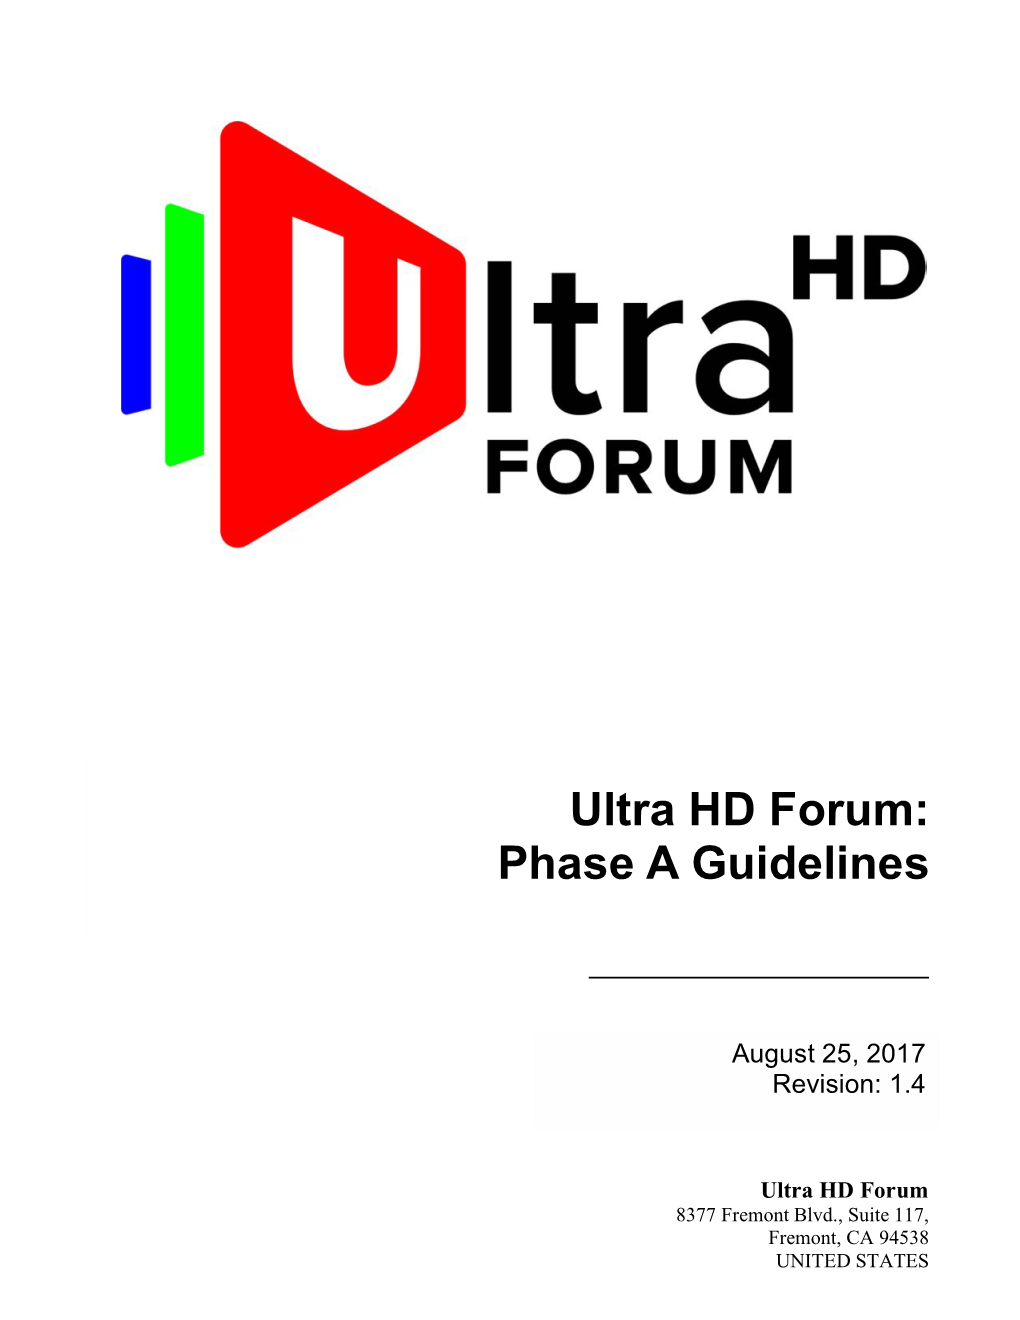 UHD Phase a Guidelines